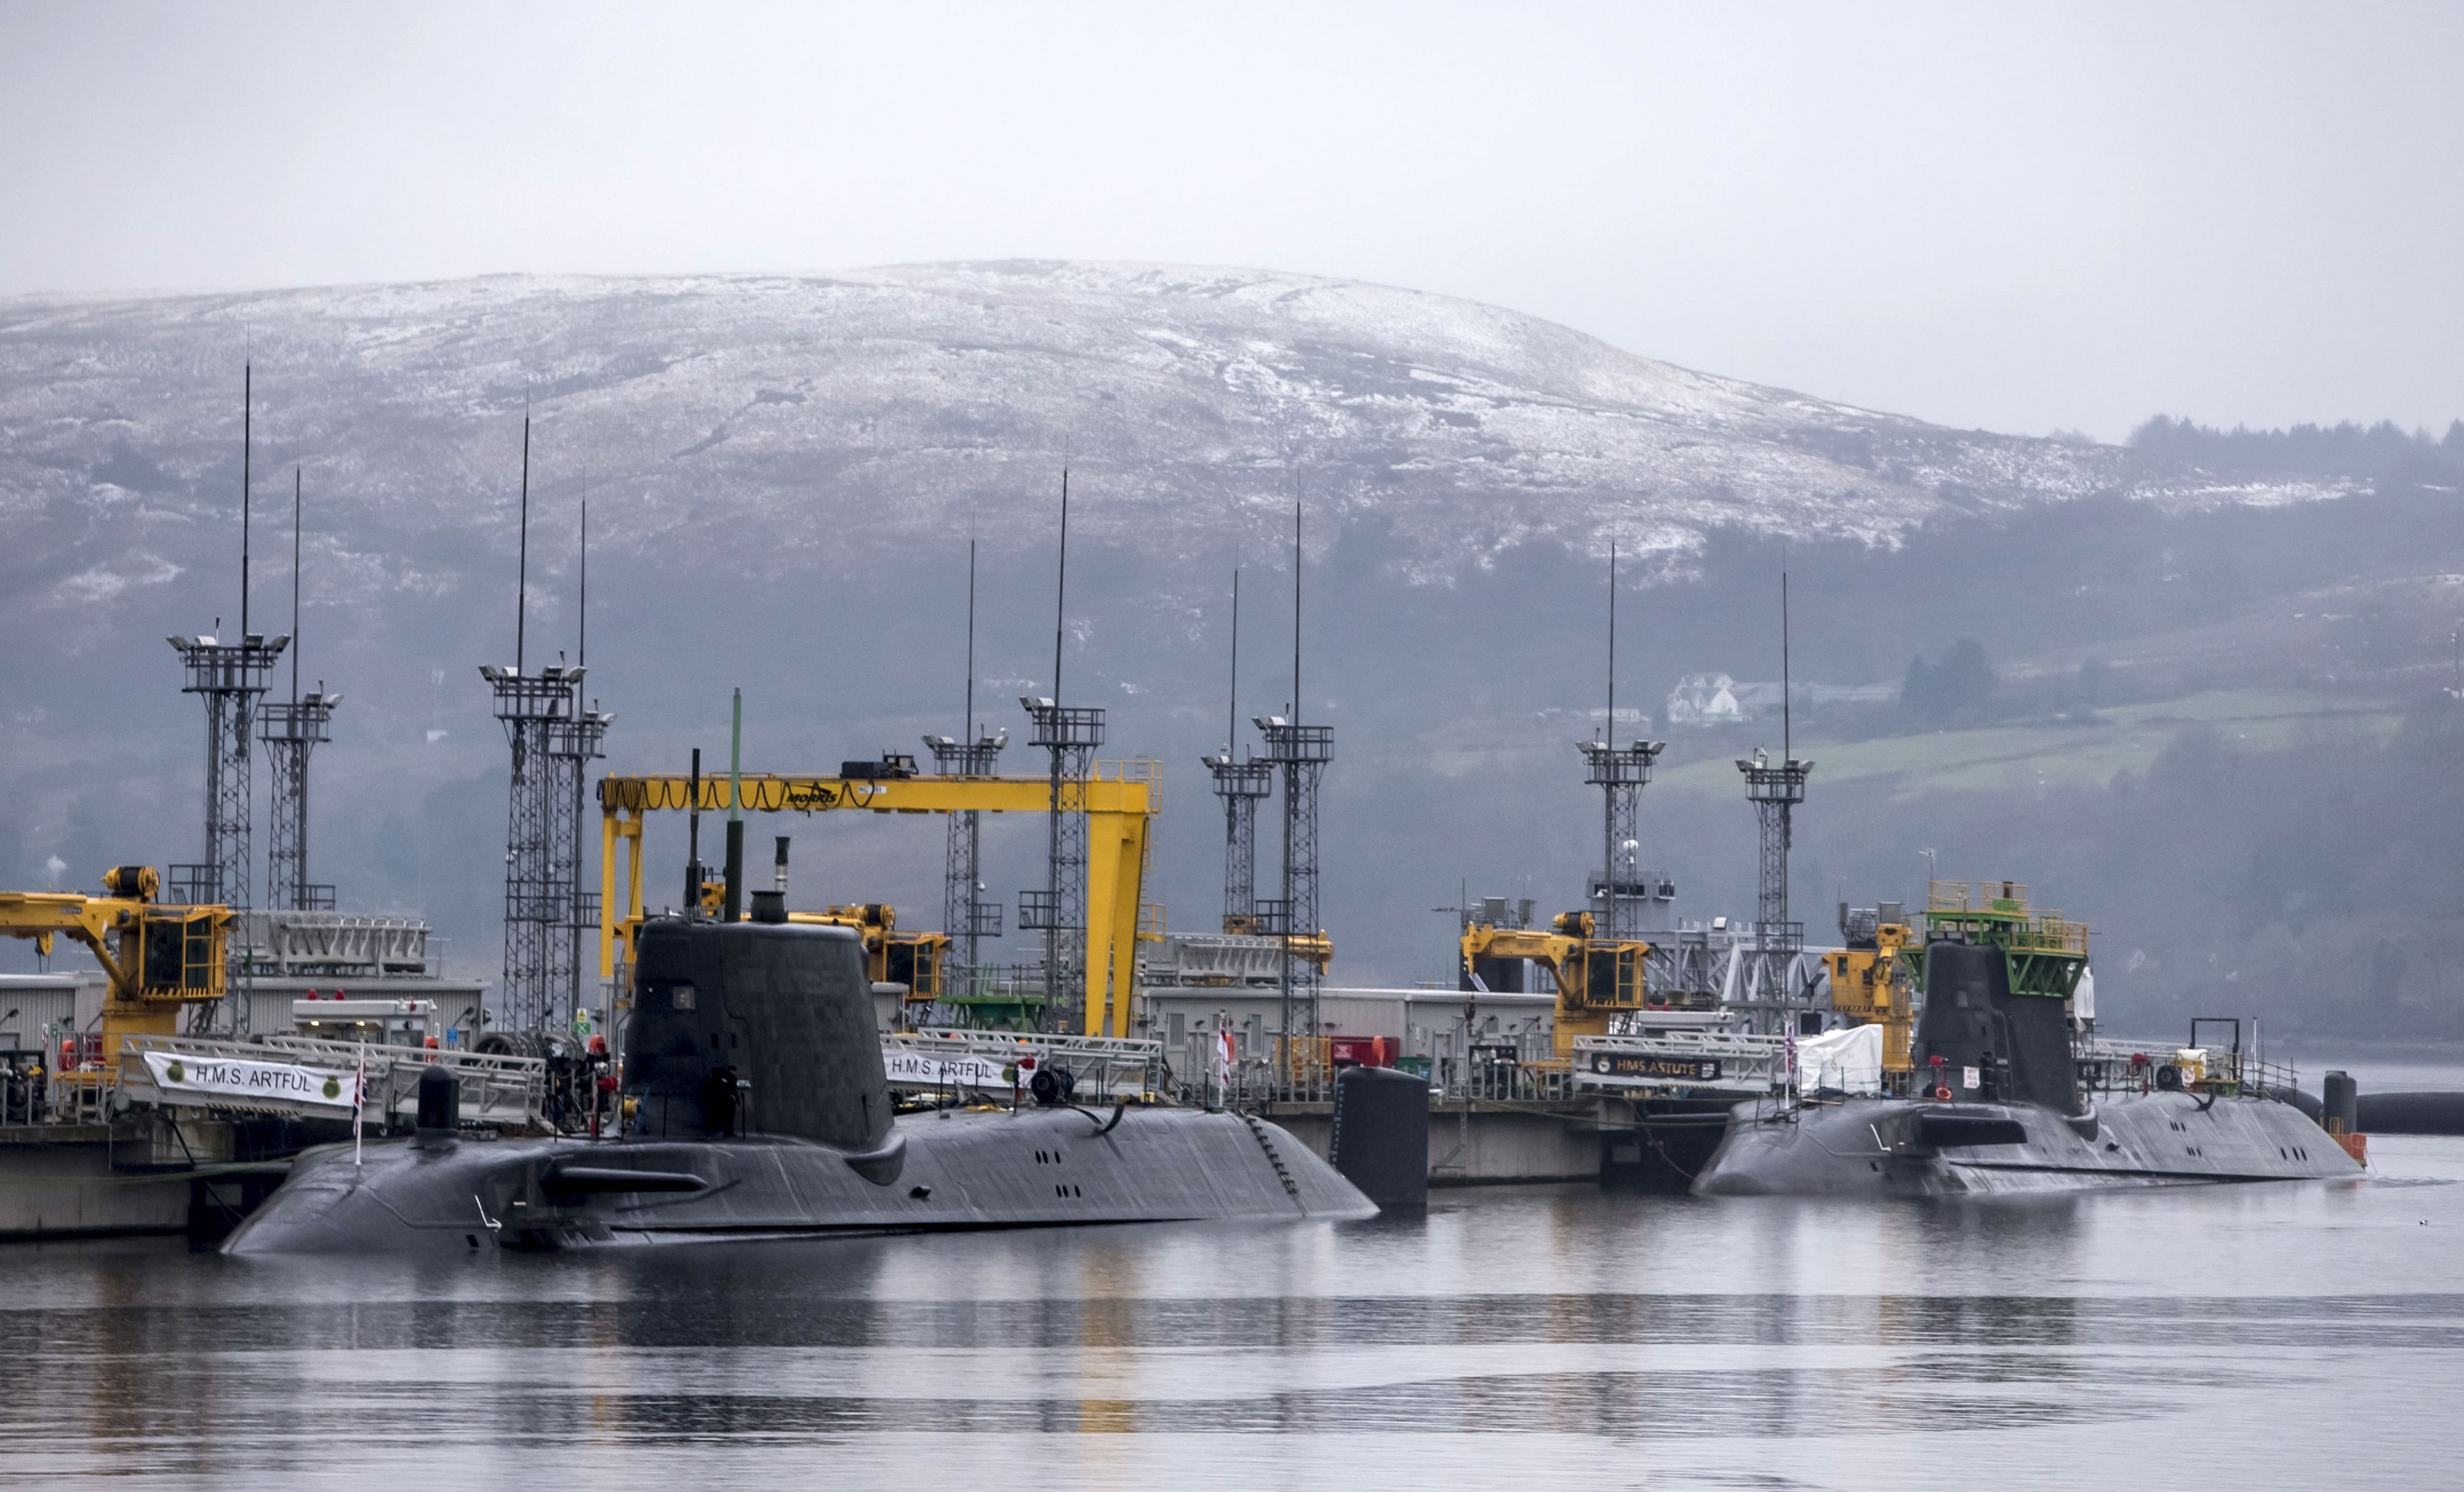 Astute-class submarines HMS Artful (left) and HMS Astute (right), at HM Naval Base Clyde, also known as Faslane, ahead of a visit by Defence Secretary Michael Fallon.